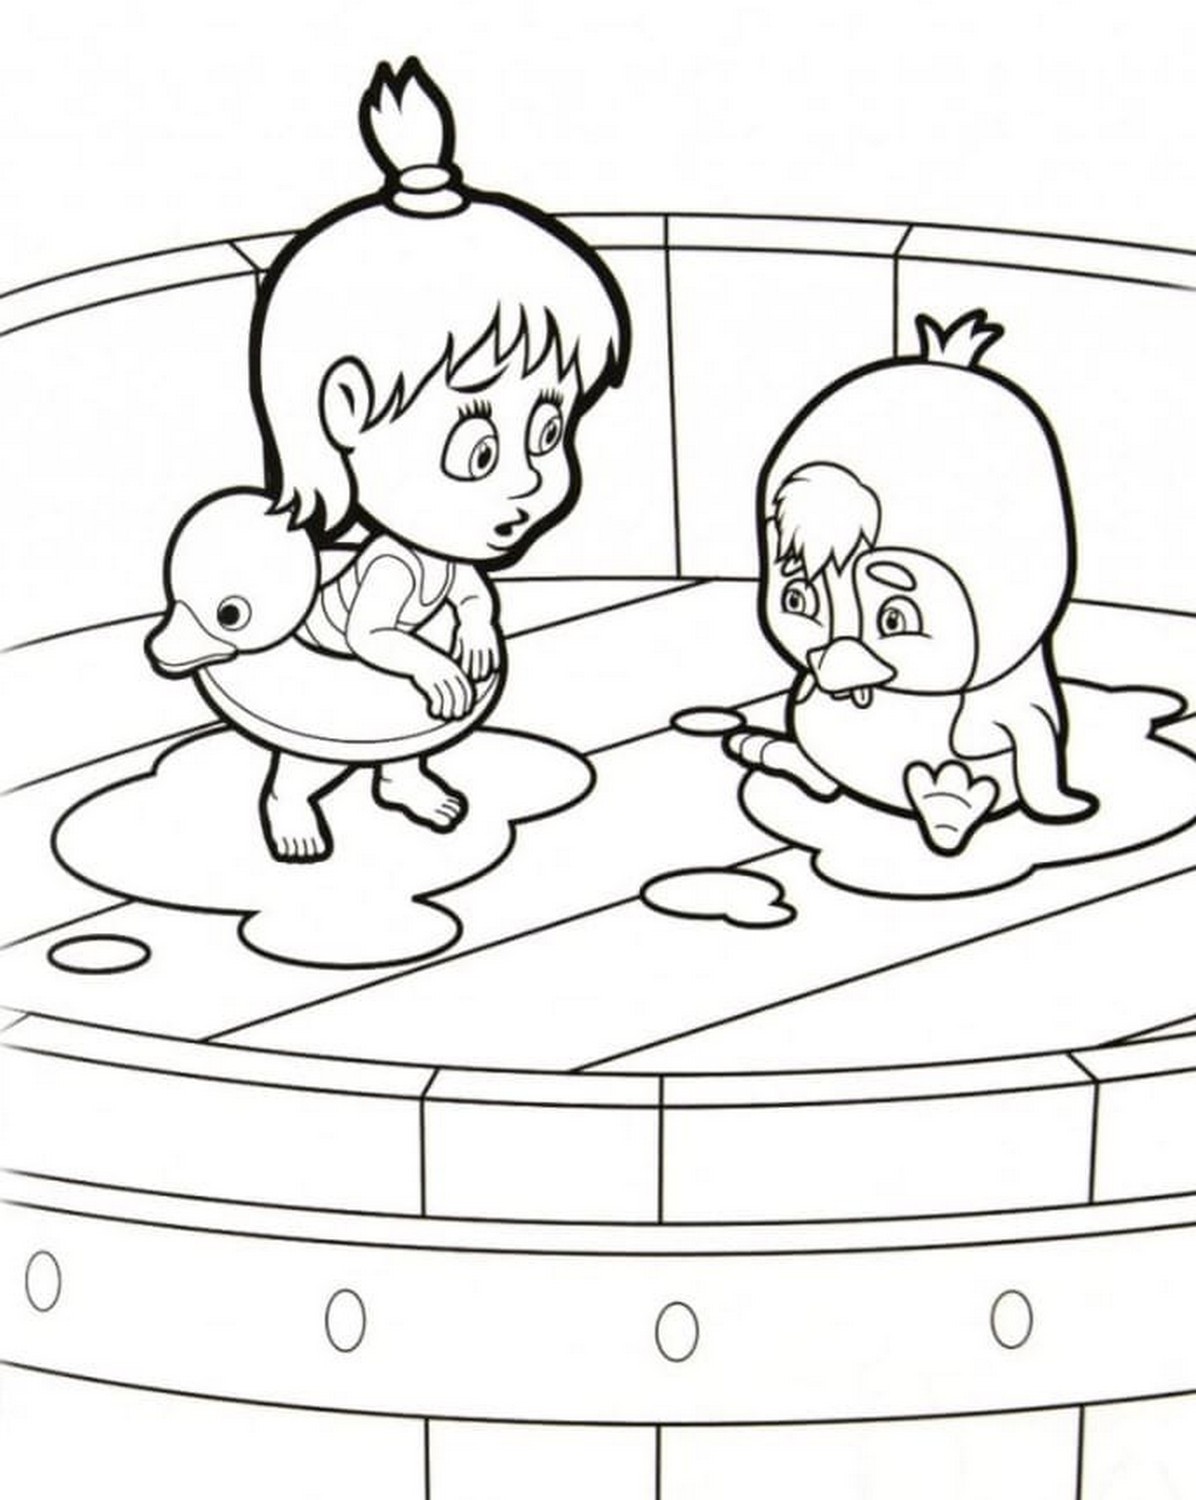 Masha and the Bear 21 drawing from Masha and the Bear to print and color